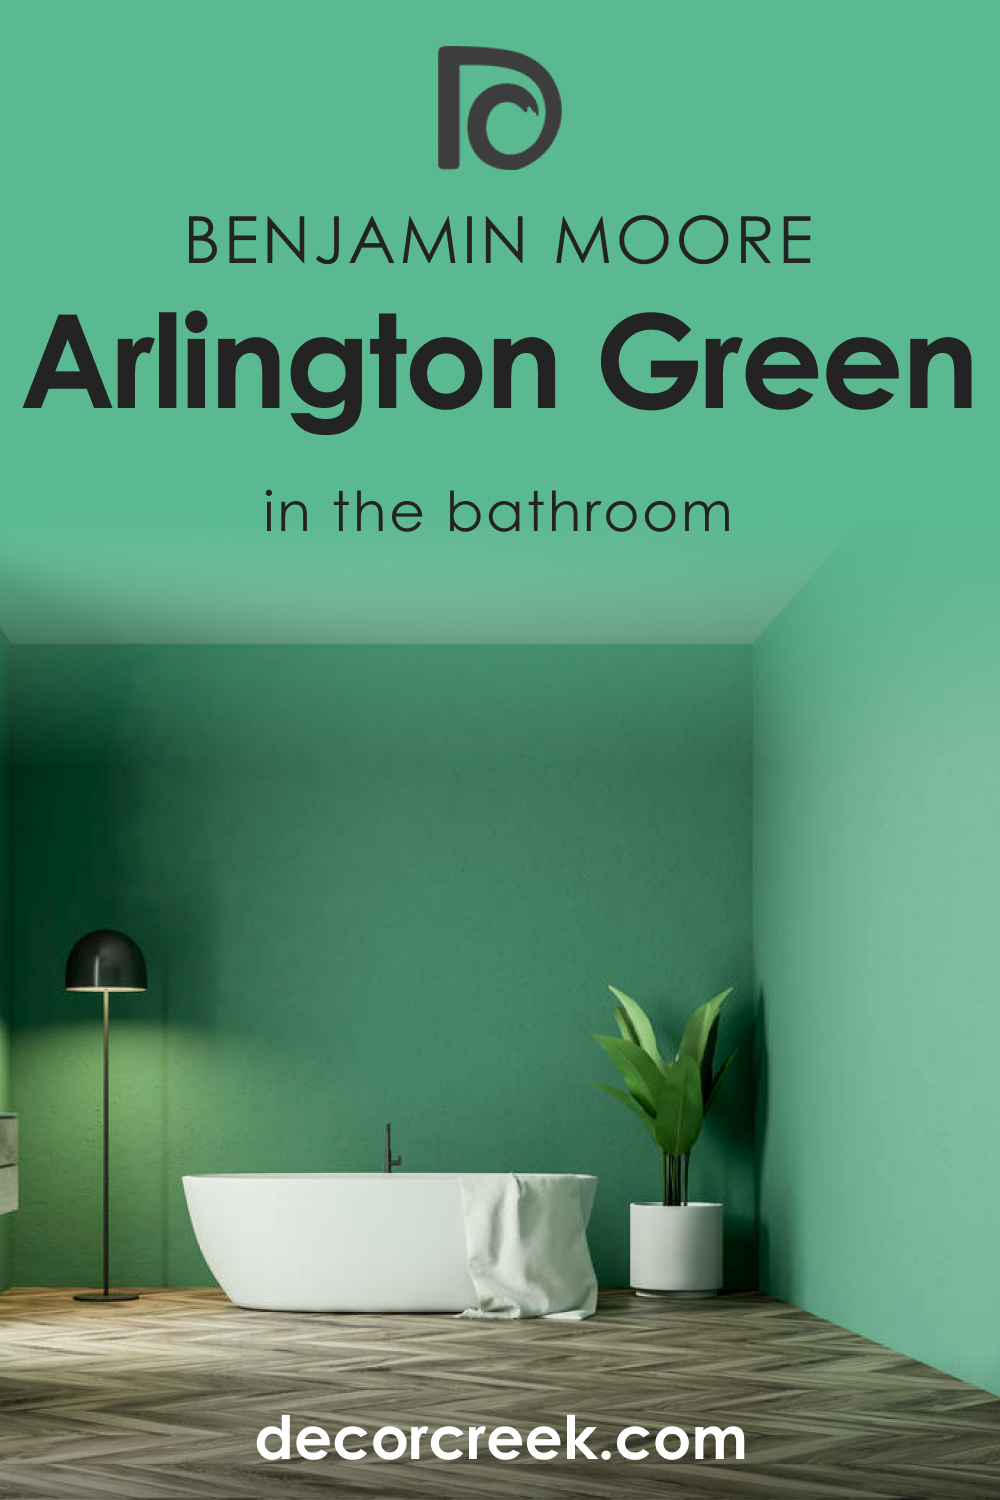 How to Use Arlington Green 580 in the Bathroom?